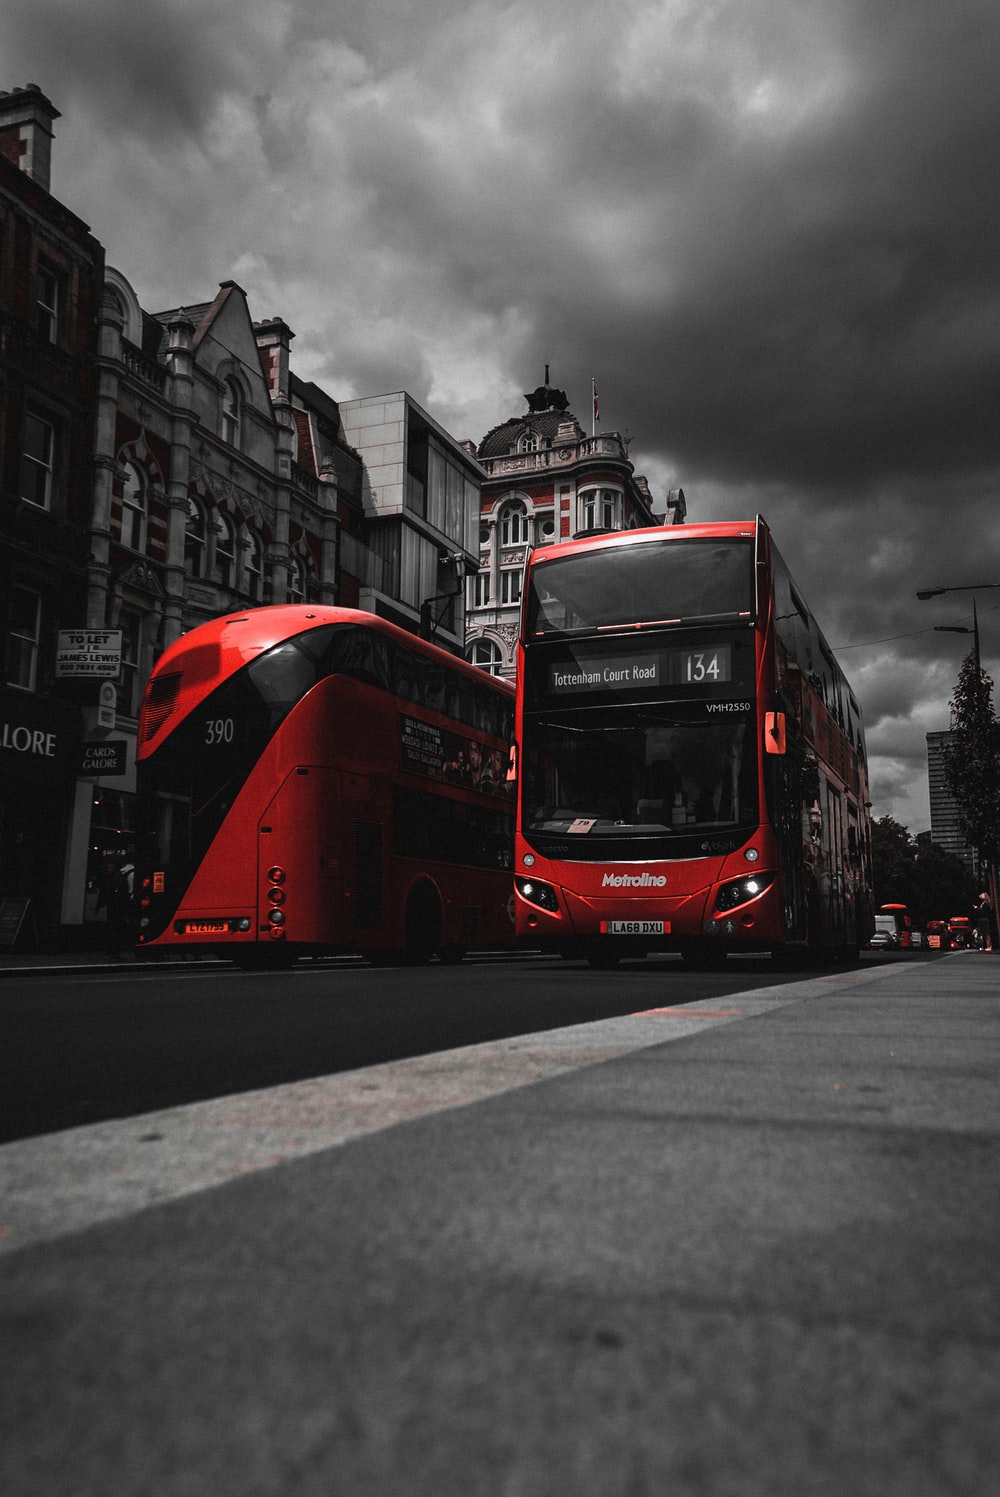 red and black bus on road near concrete buildings photo